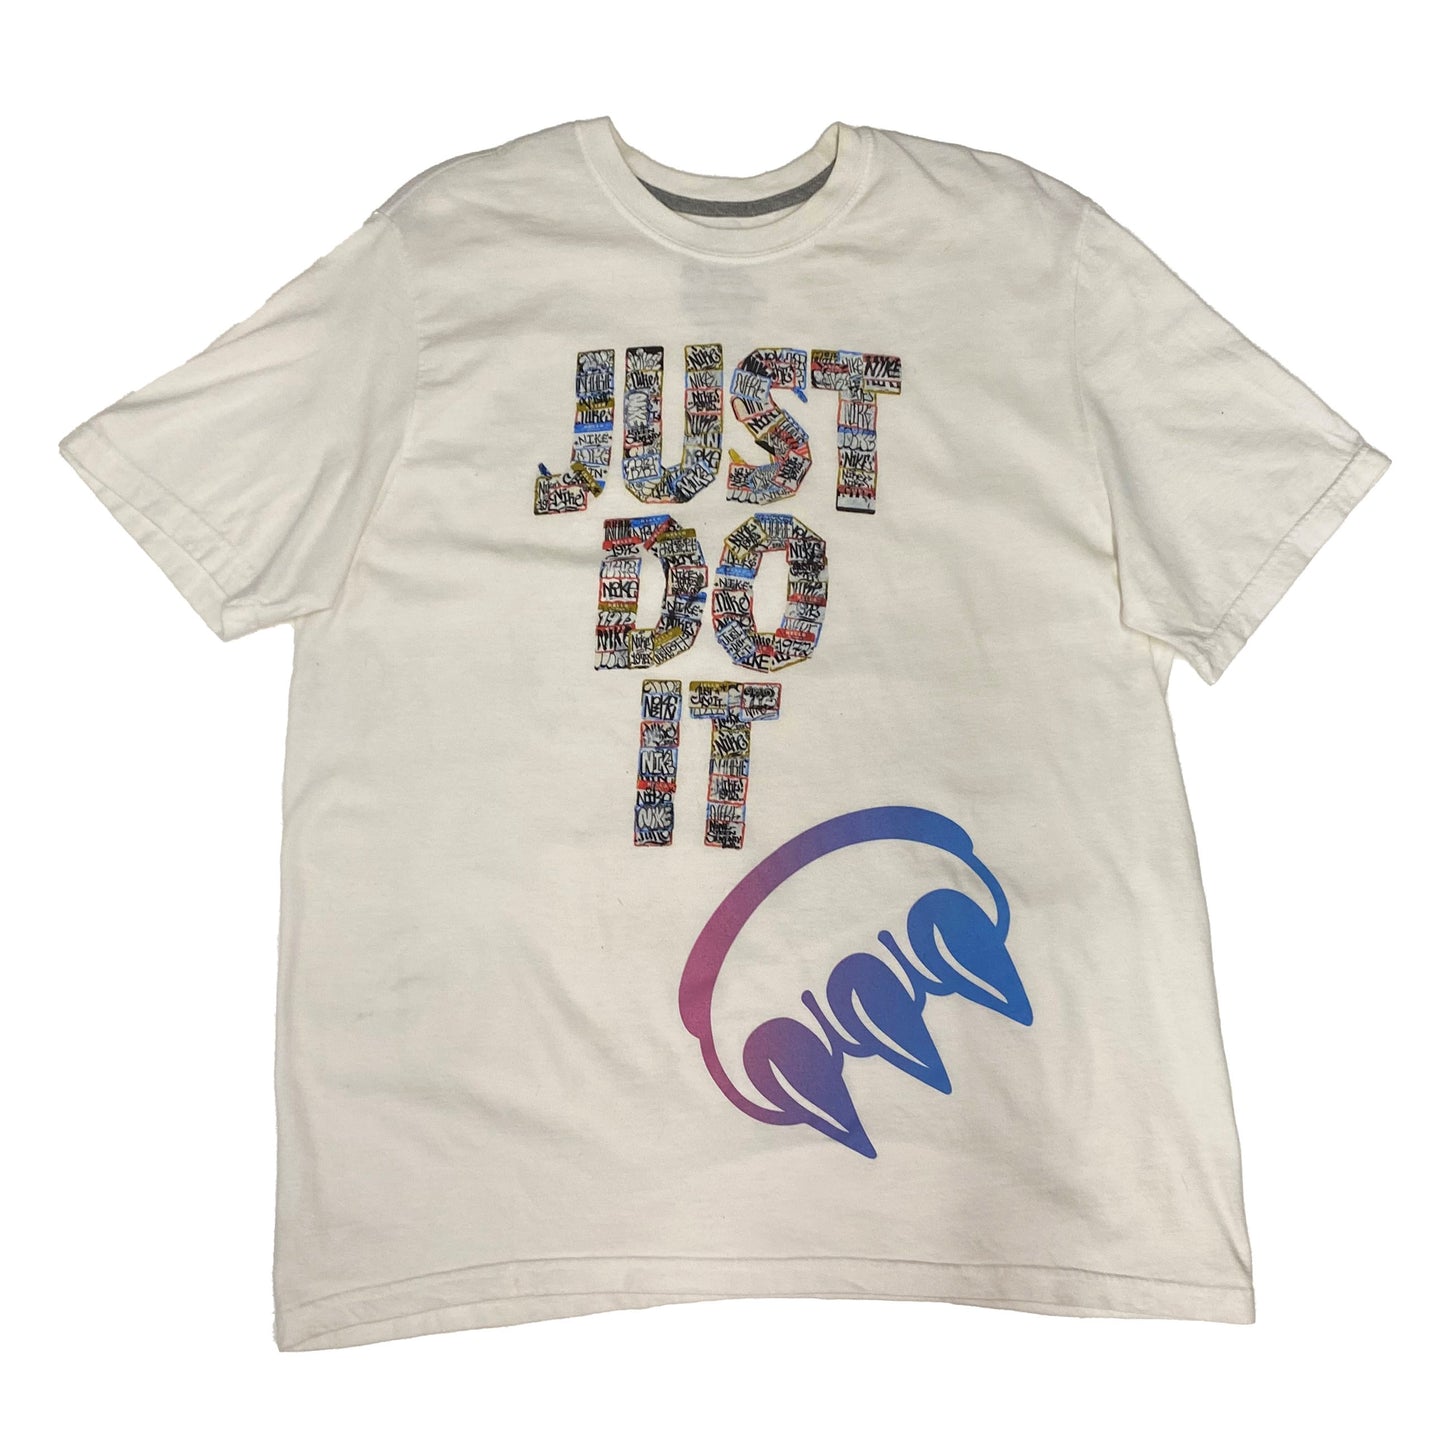 JUST DO IT GRADIENT CLAW TEE